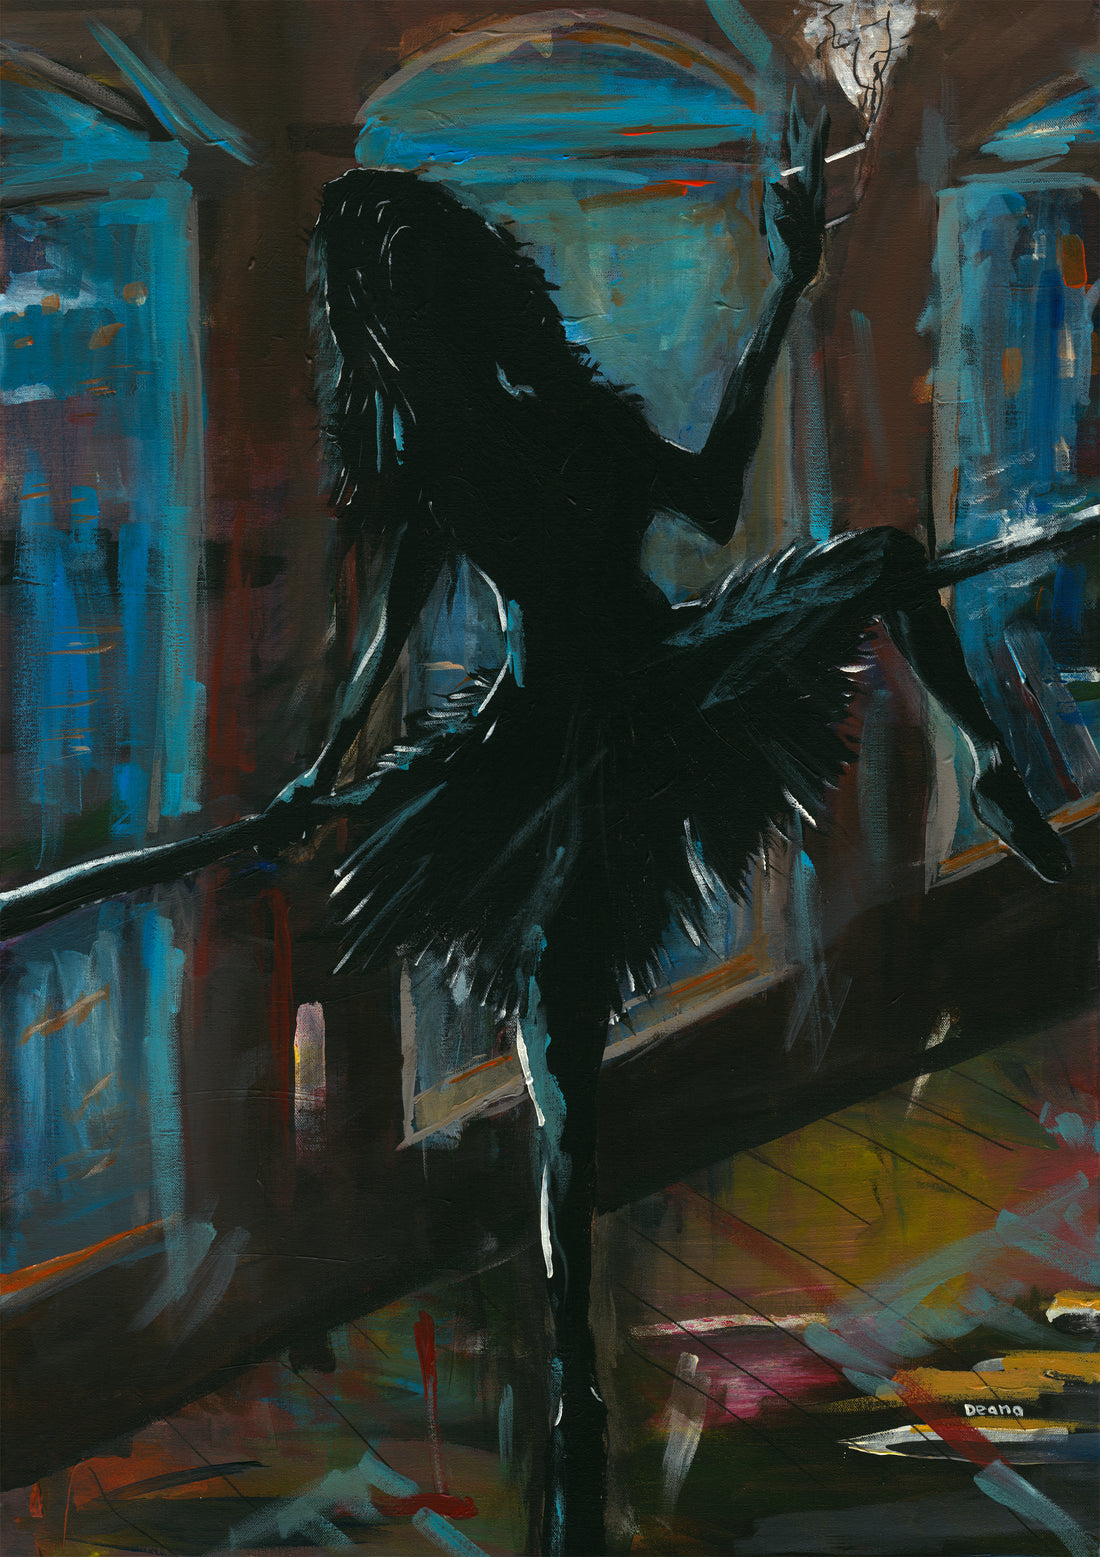 A detailed view of a limited-edition giclée print, showcasing a ballerina in a black tutu with a cigarette. The enveloping shadows obscure her form, presenting an image of enigmatic elegance.